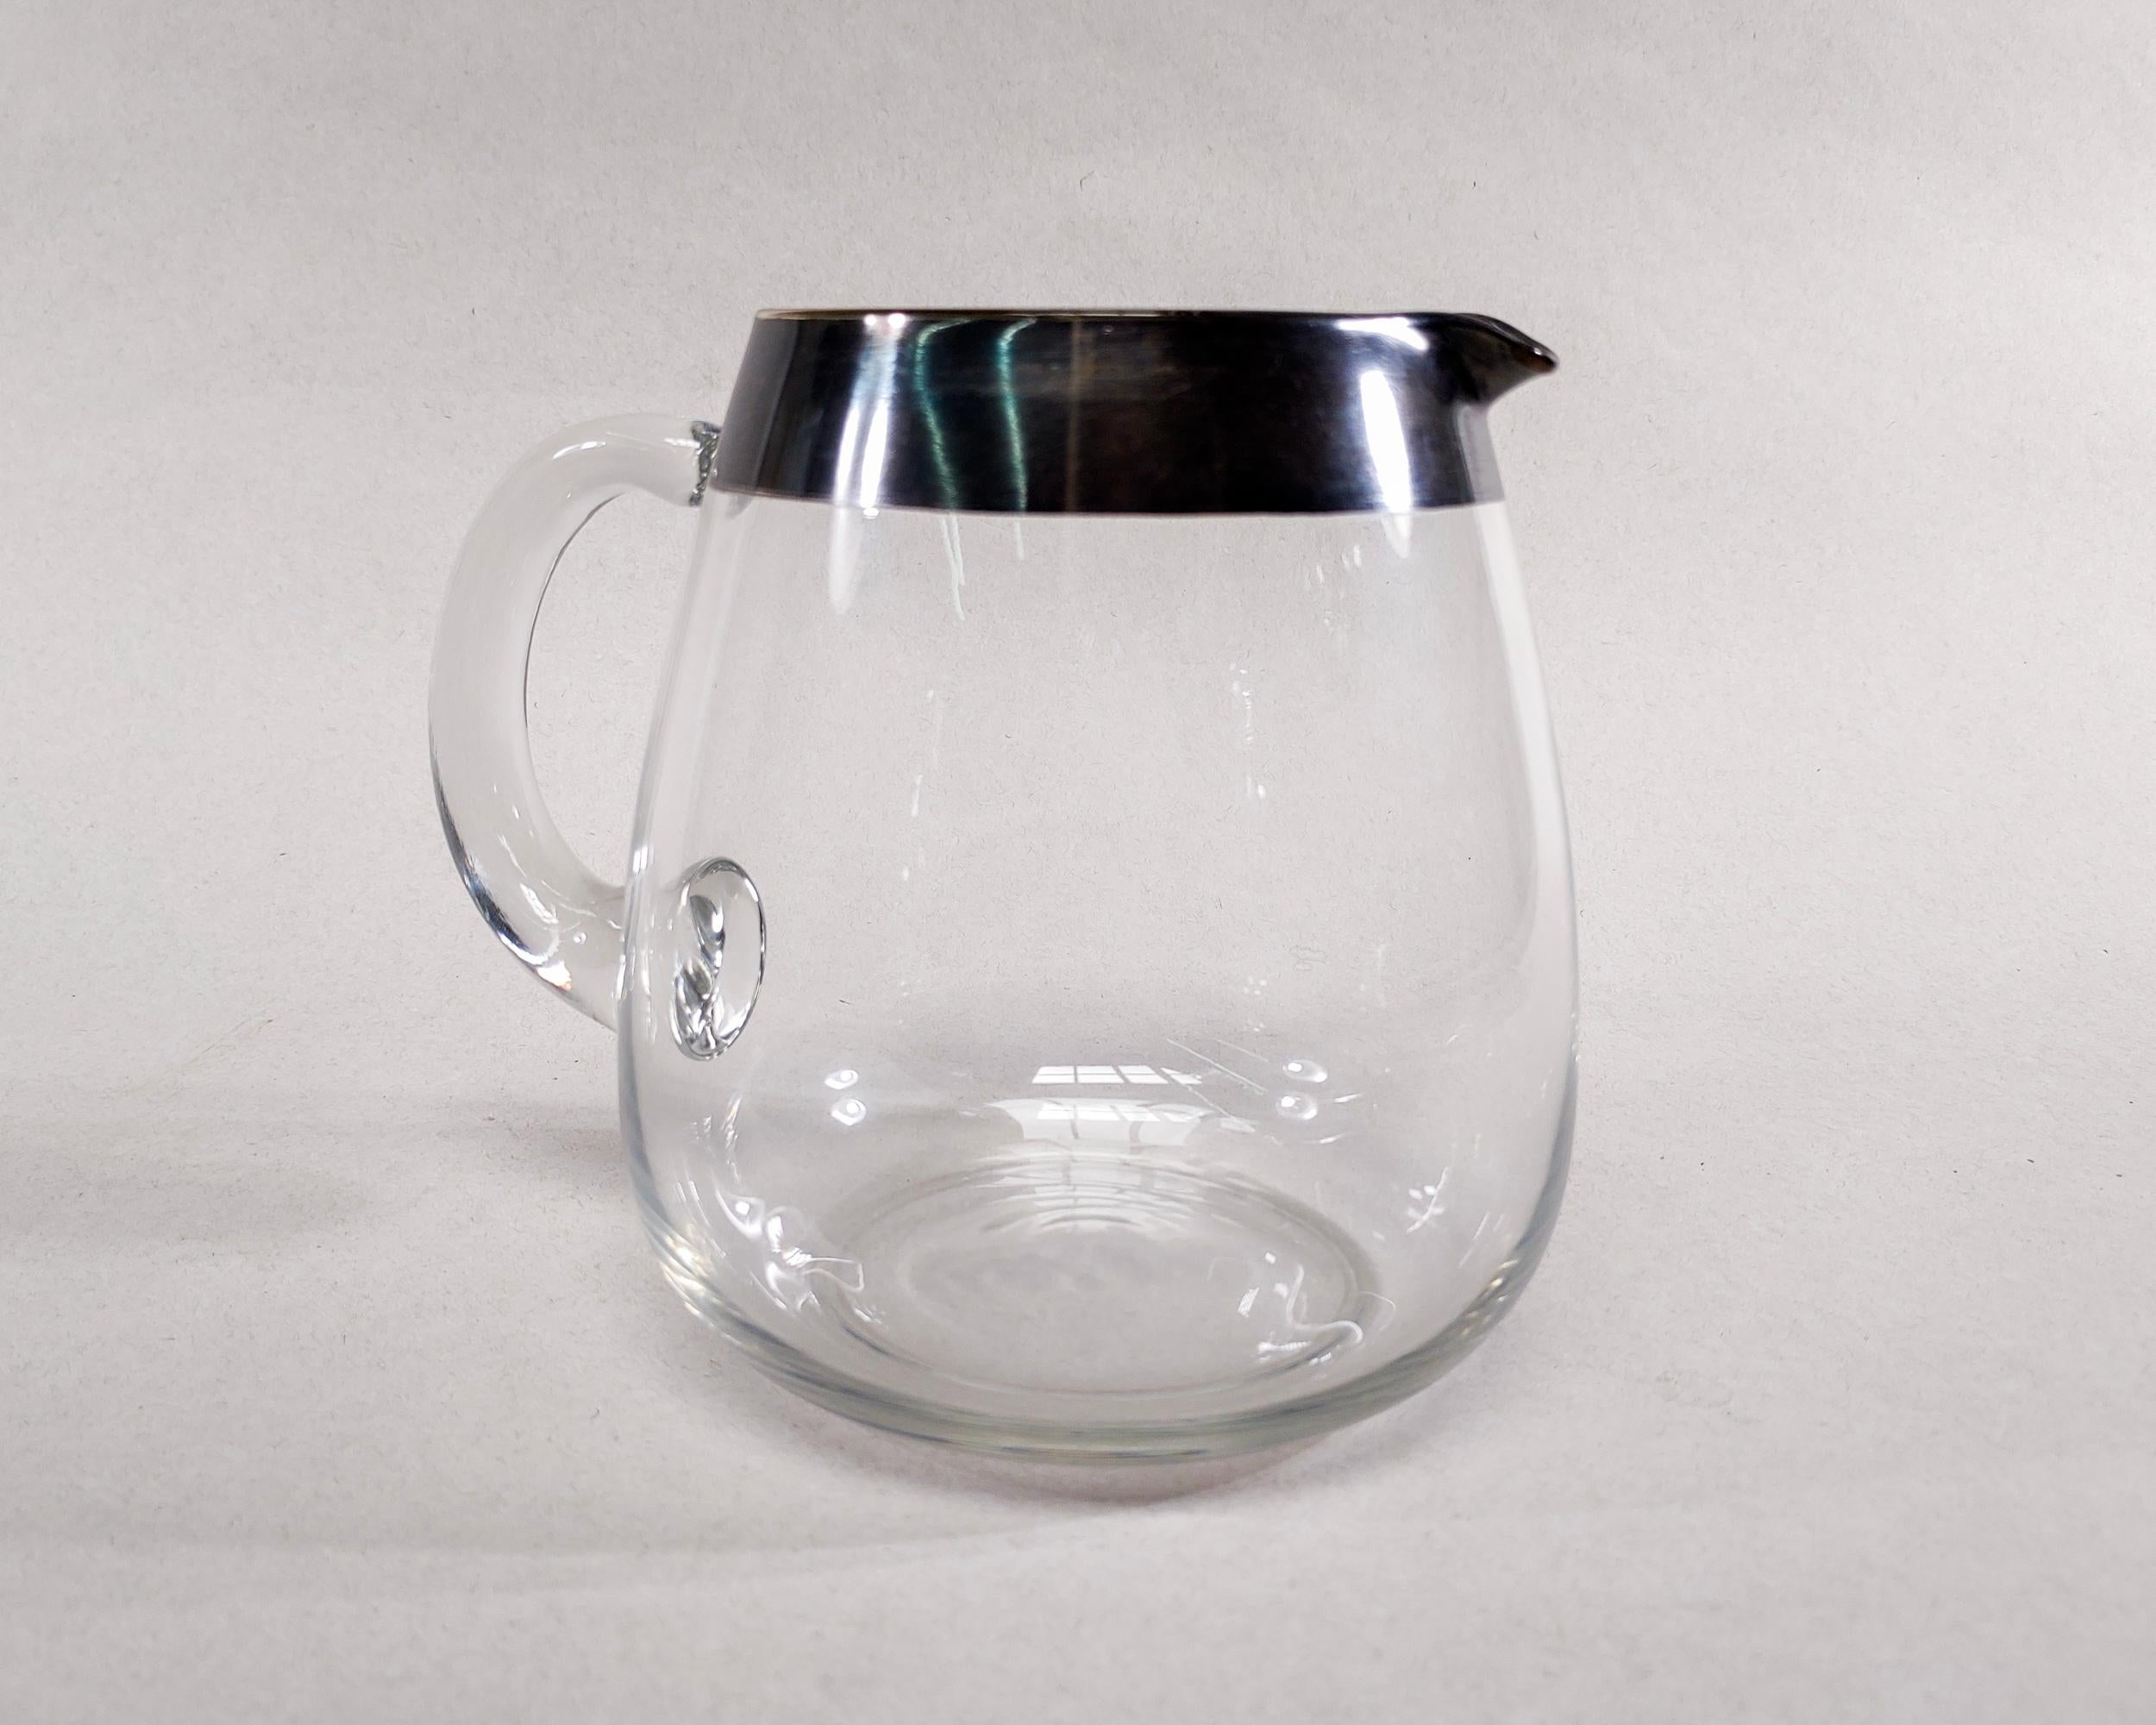 Original 1960s Dorothy Thorpe hand blown glass pitcher with iced lip spout. Iconic thick sterling silver band around the rim. Overall great vintage condition, natural darkened patina on silver, some light wear on rim as shown in photos.

6-3/4